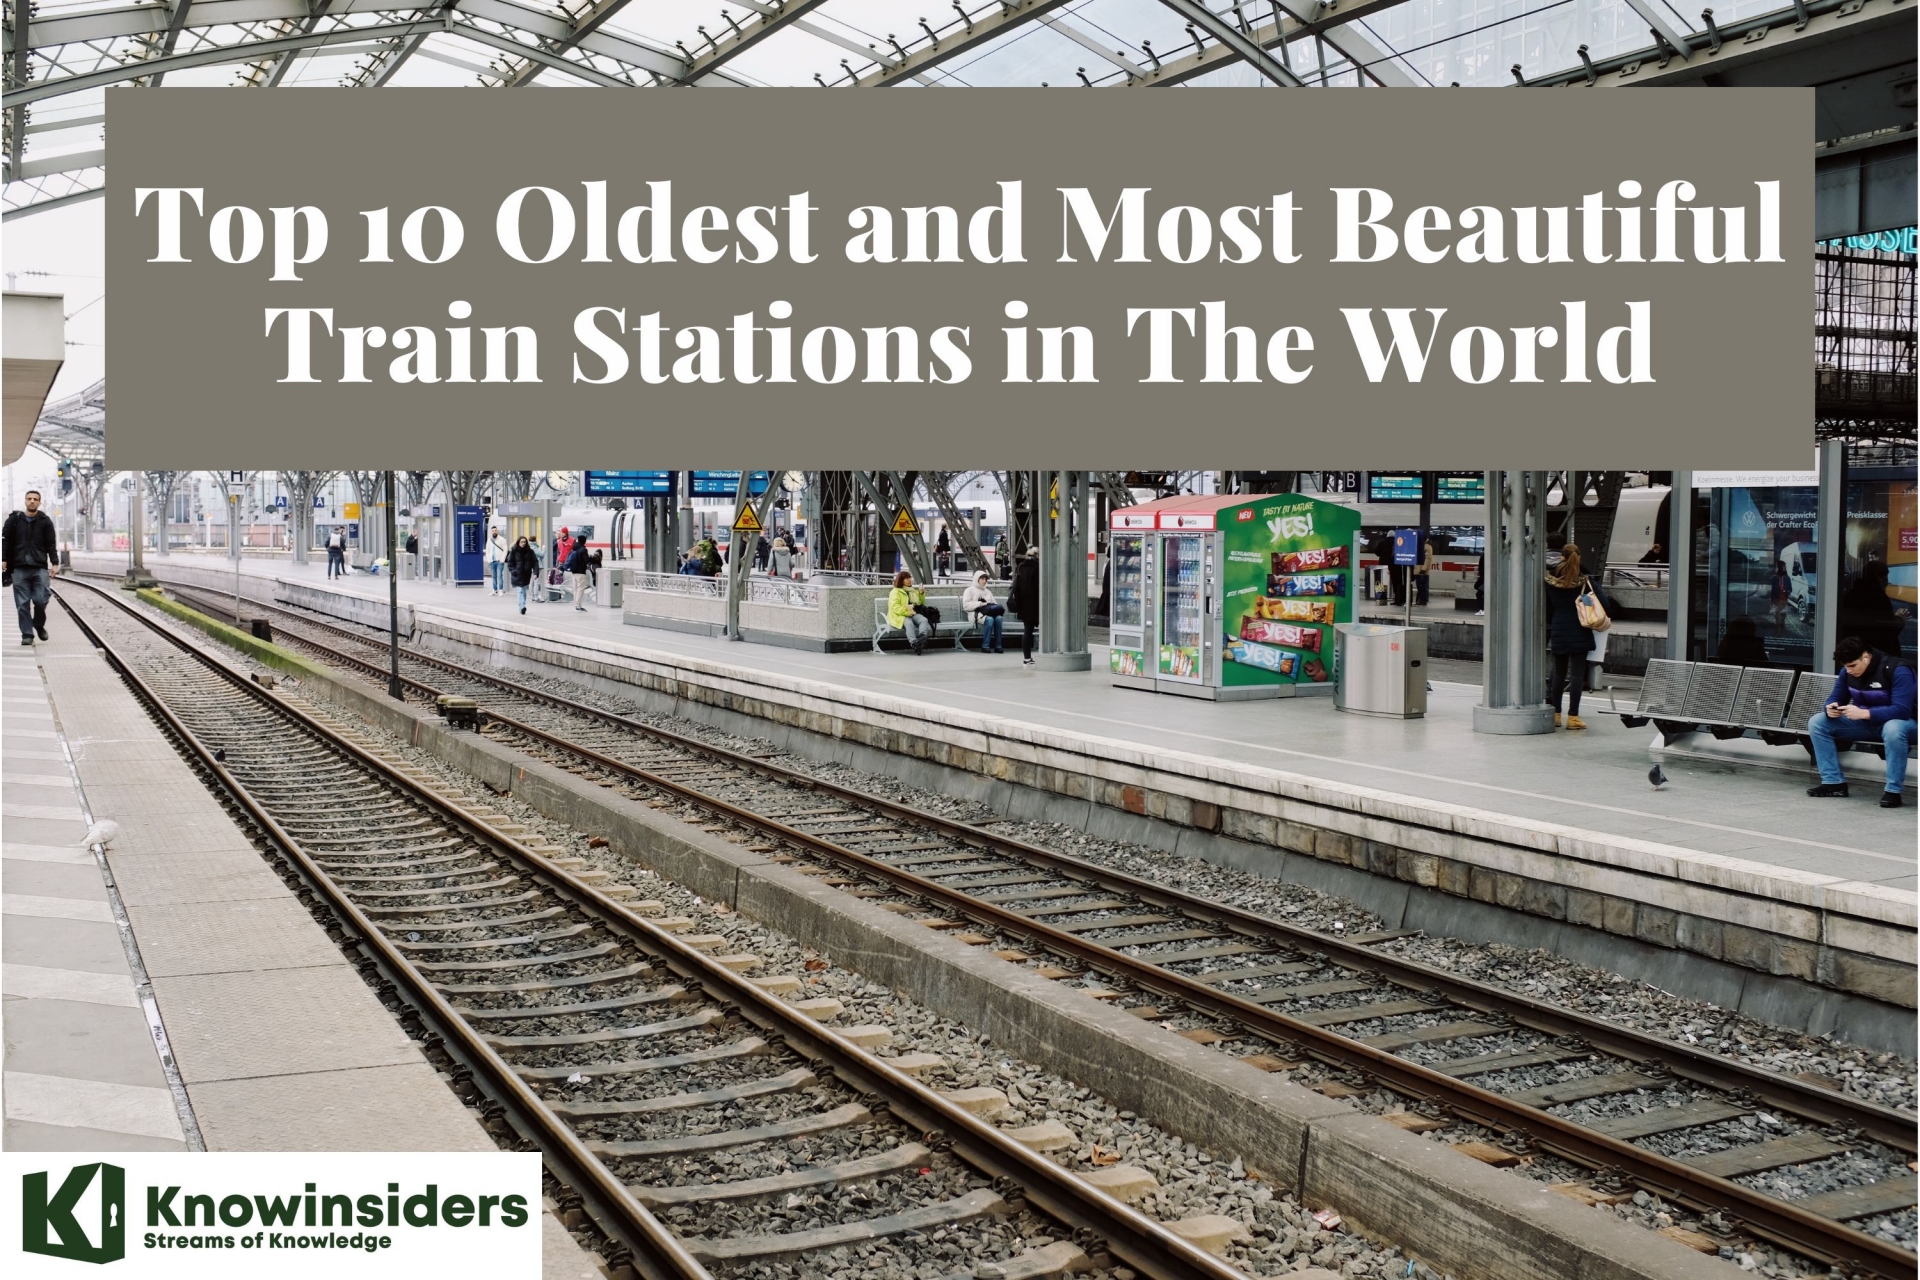 Top 10 Oldest and Most Beautiful Train Stations in The World